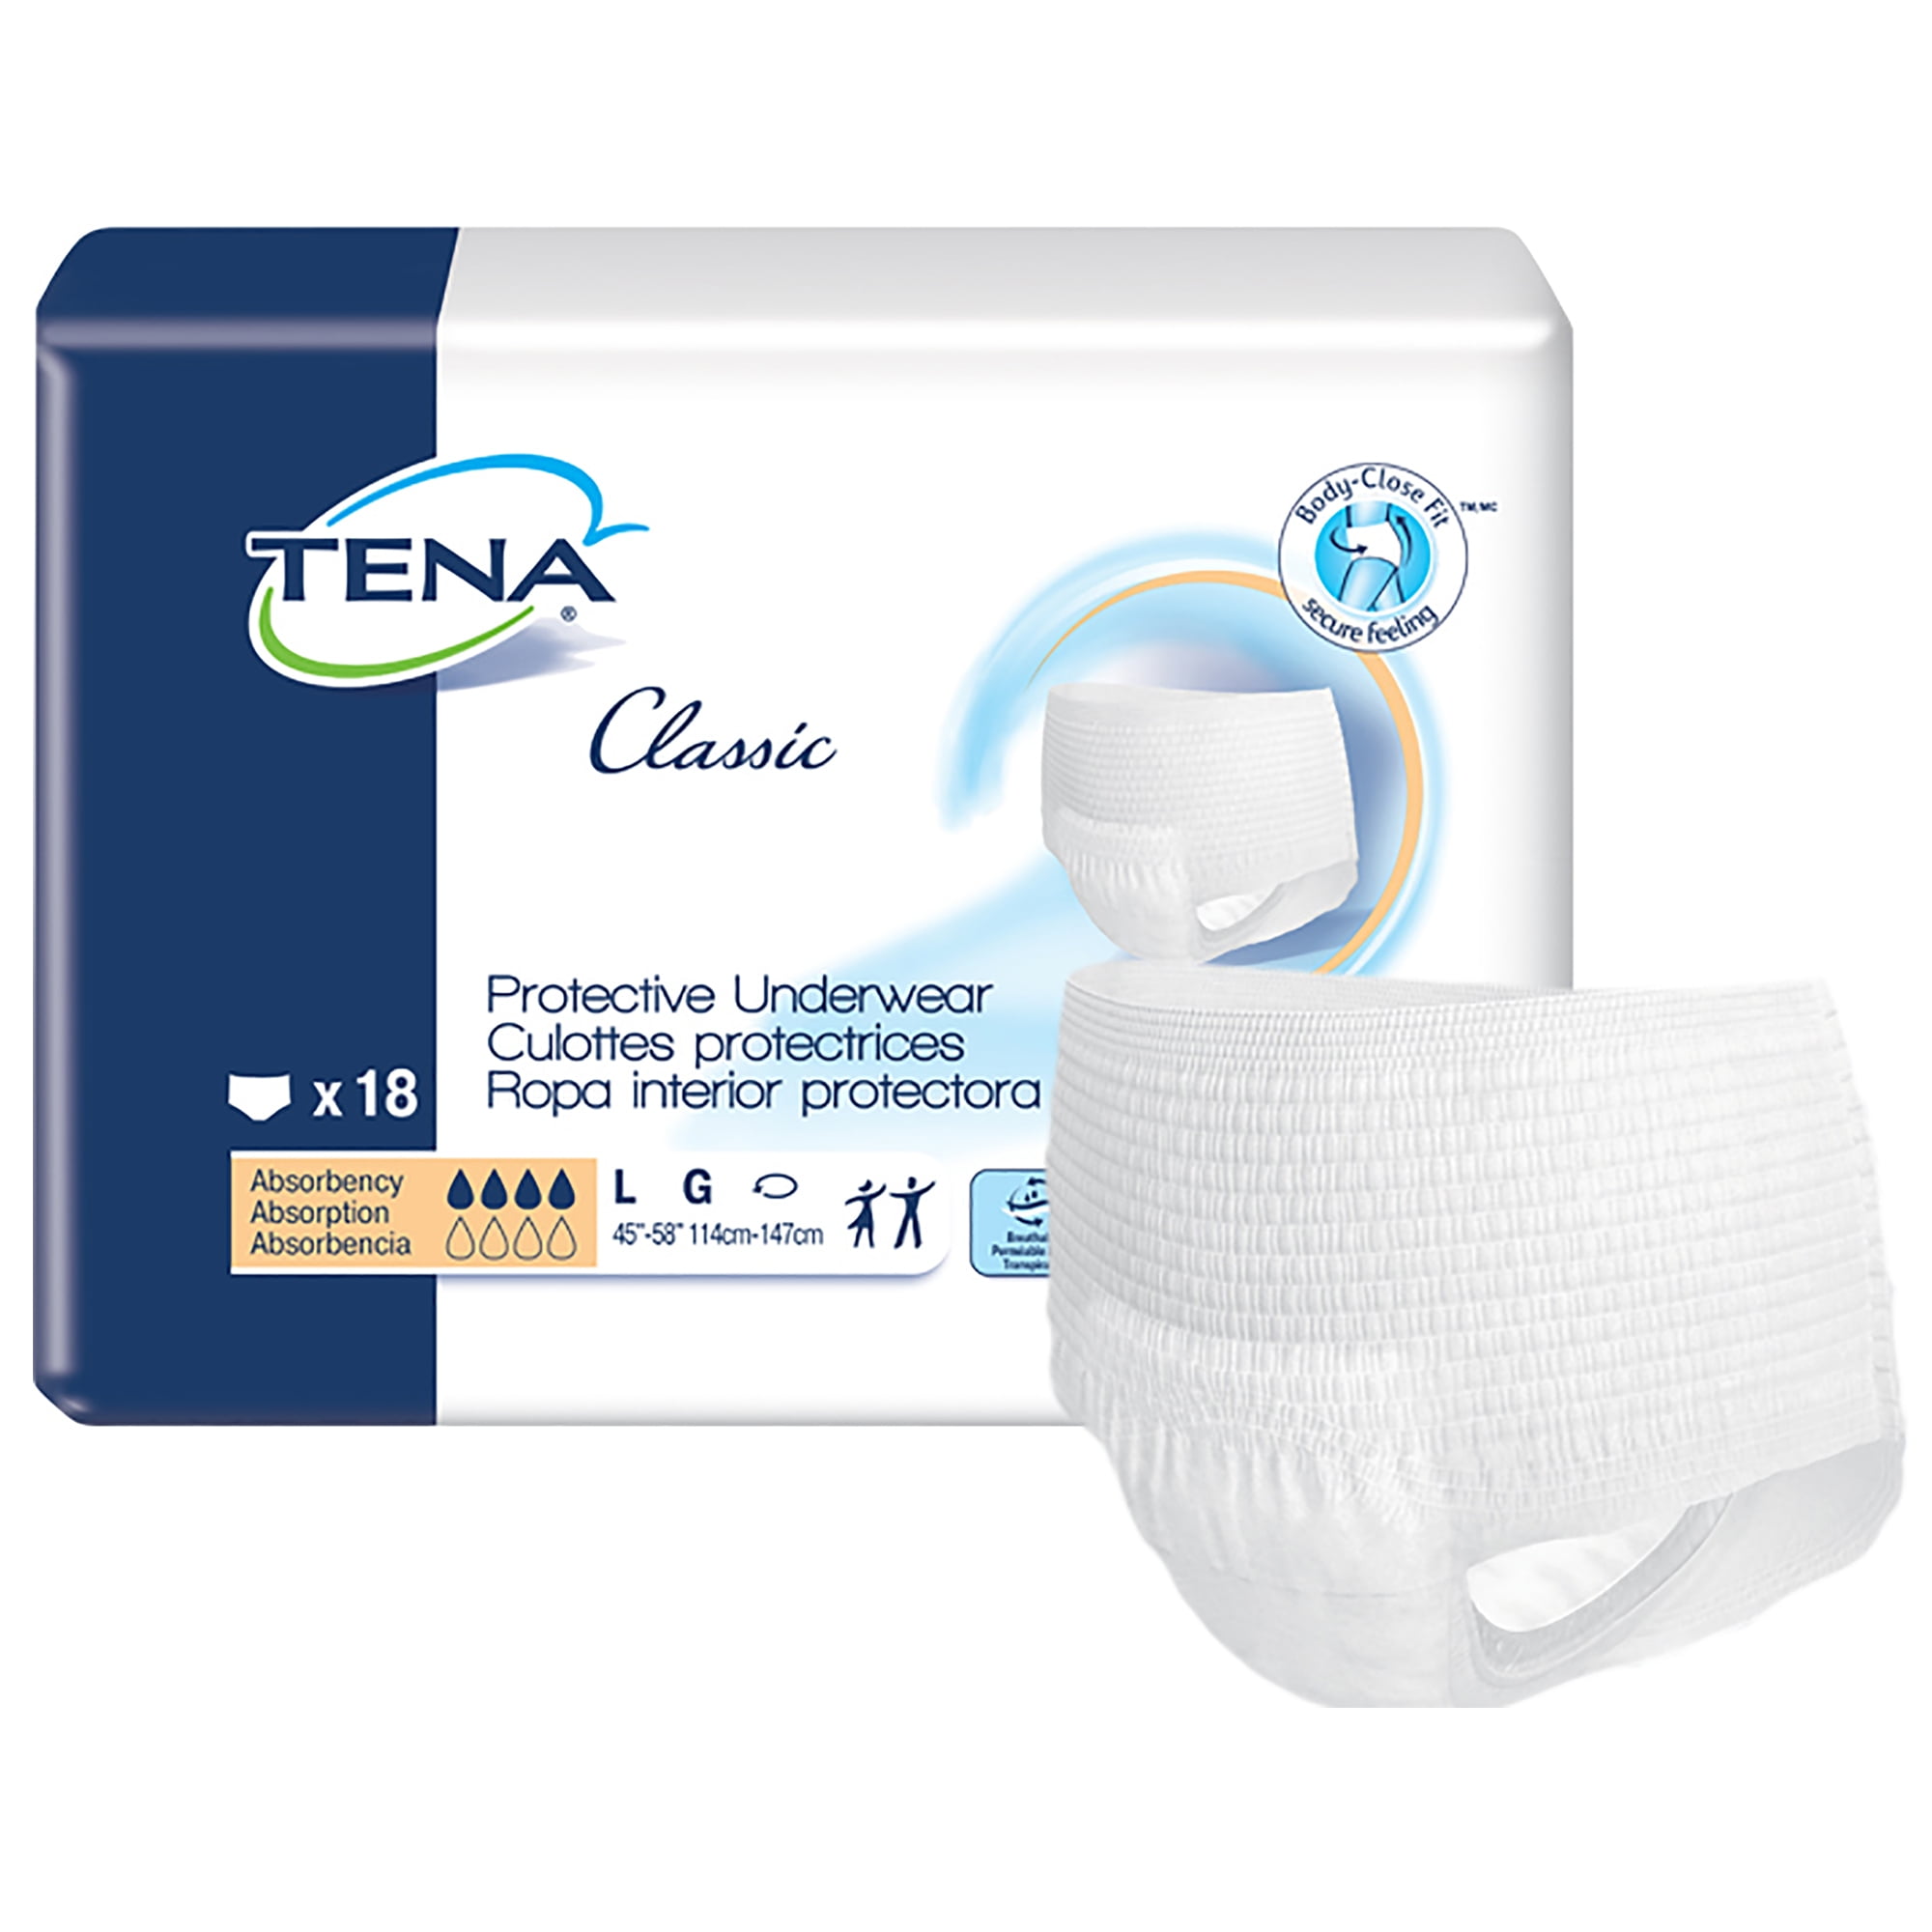 TENA Classic Protective Underwear, Incontinence, Disposable, Large, 72 ...